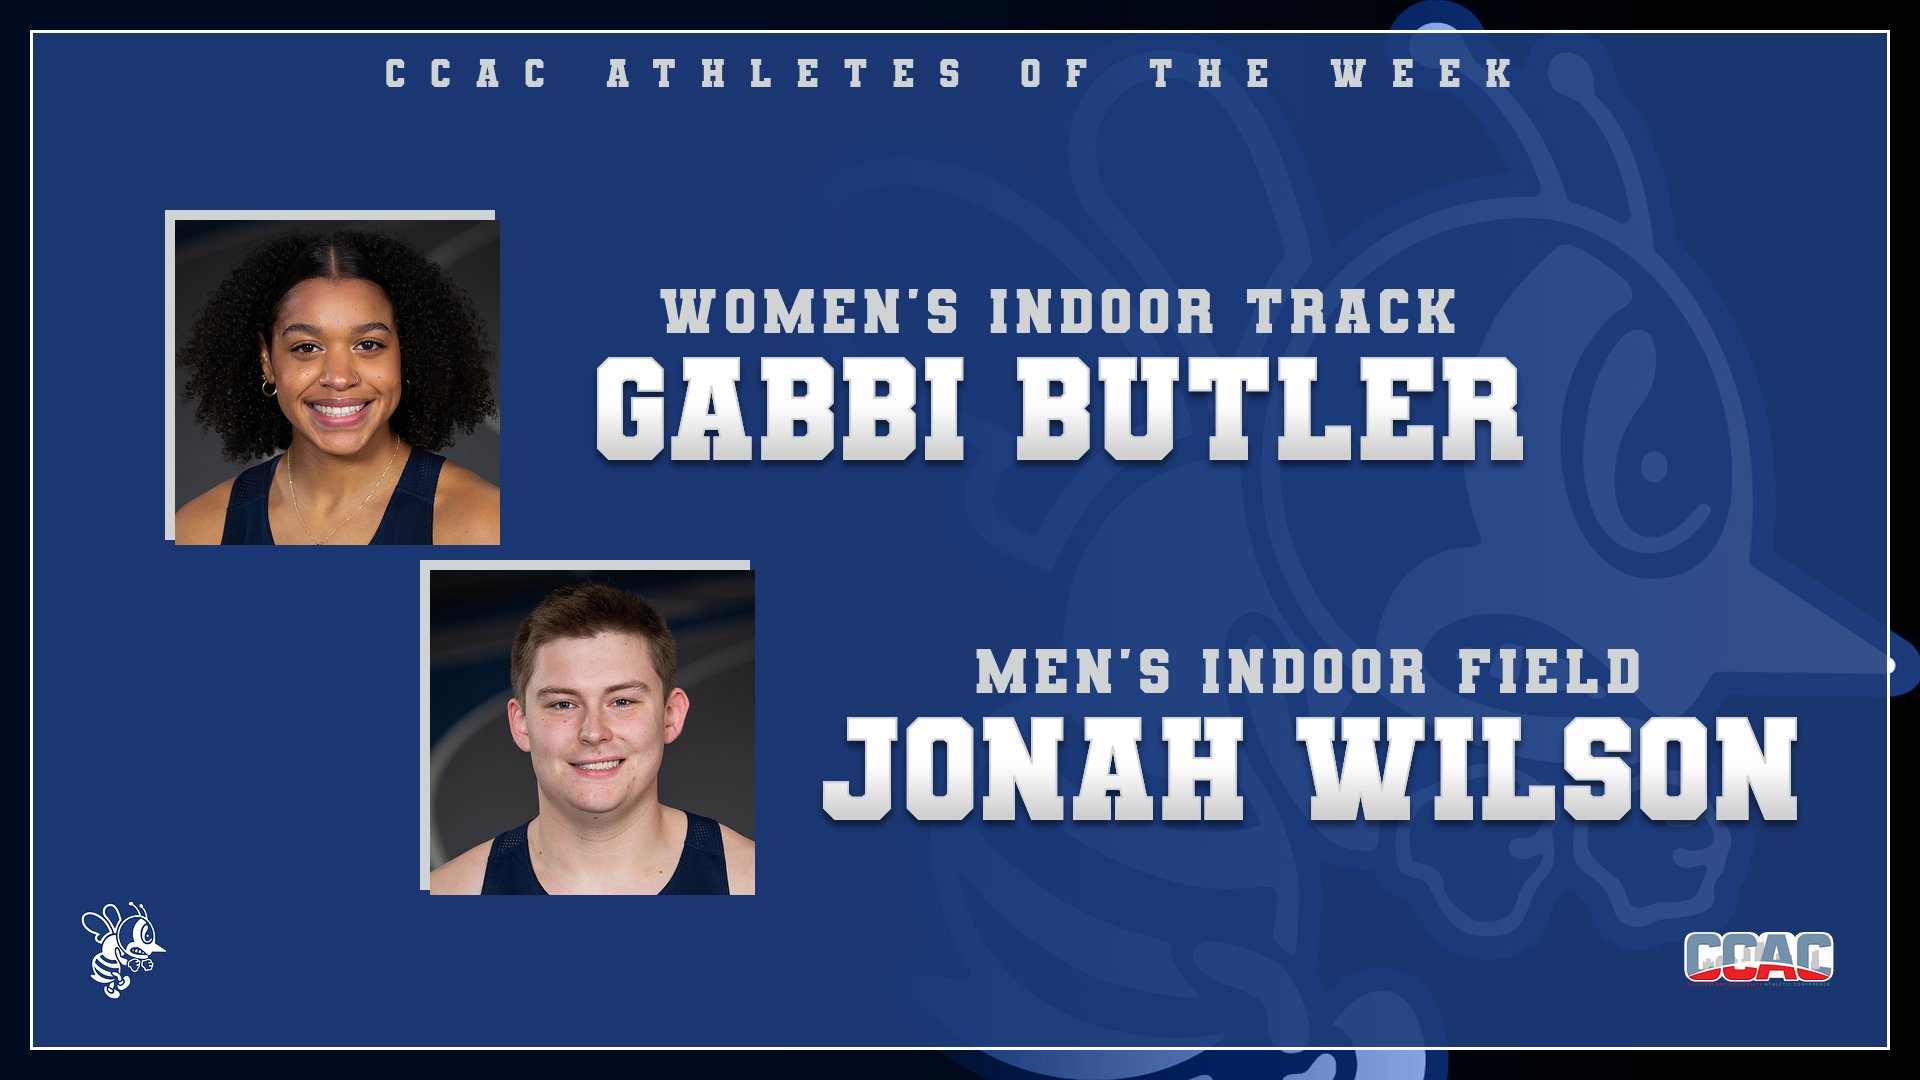 Butler, Wilson named CCAC Athletes of the Week